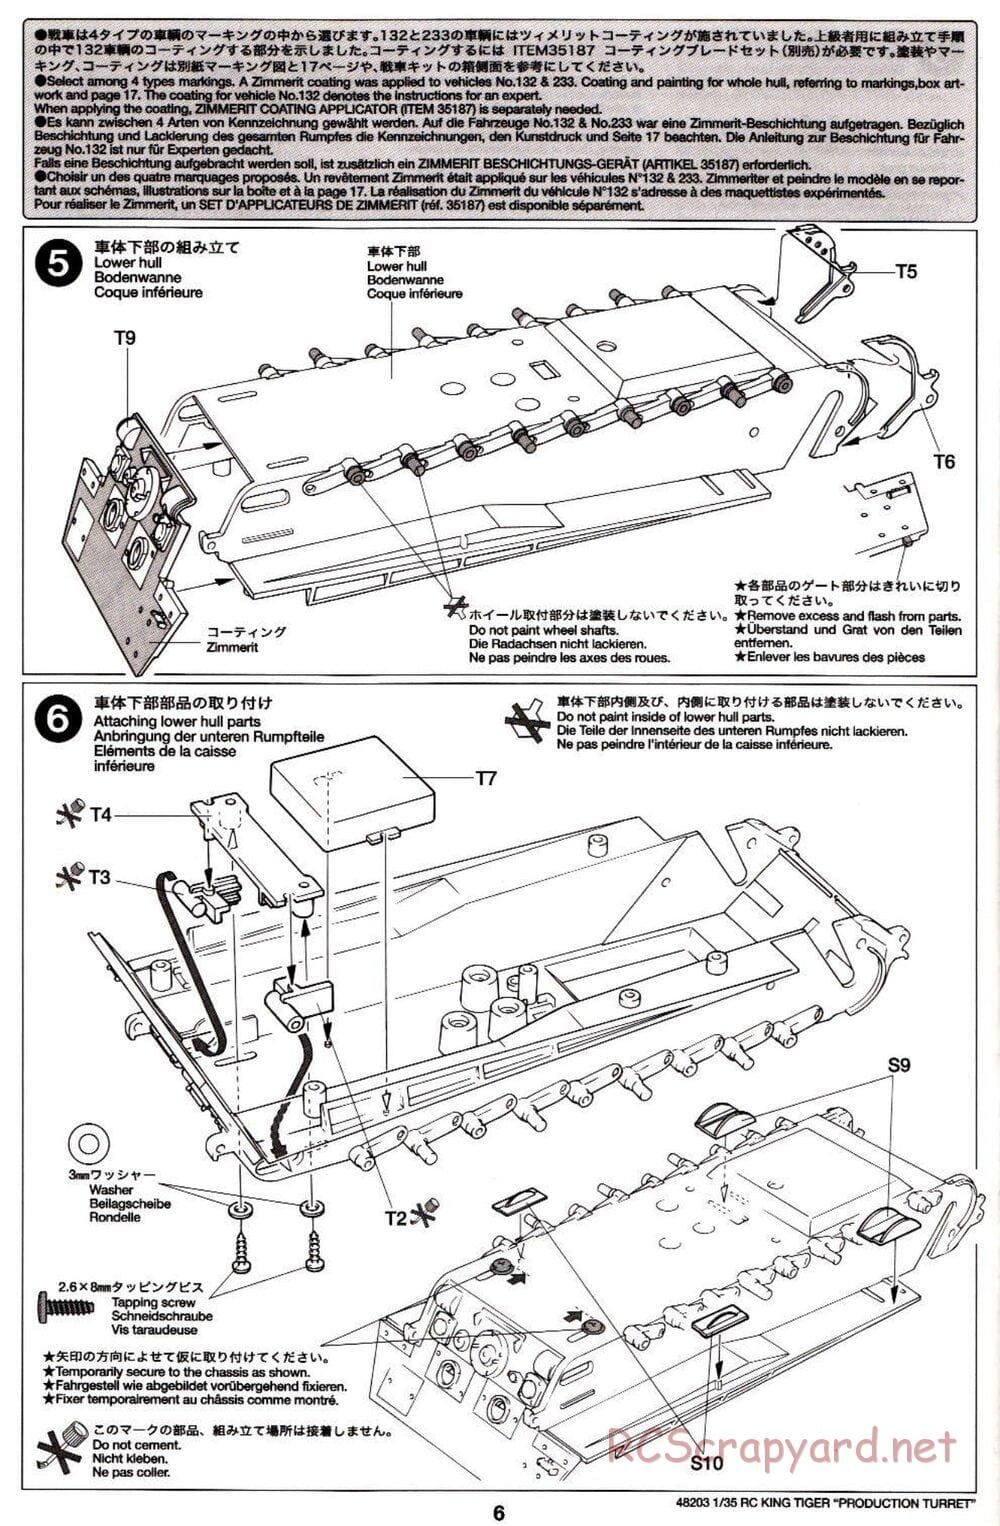 Tamiya - German King Tiger (Production Turret) - 1/35 Scale Chassis - Manual - Page 6